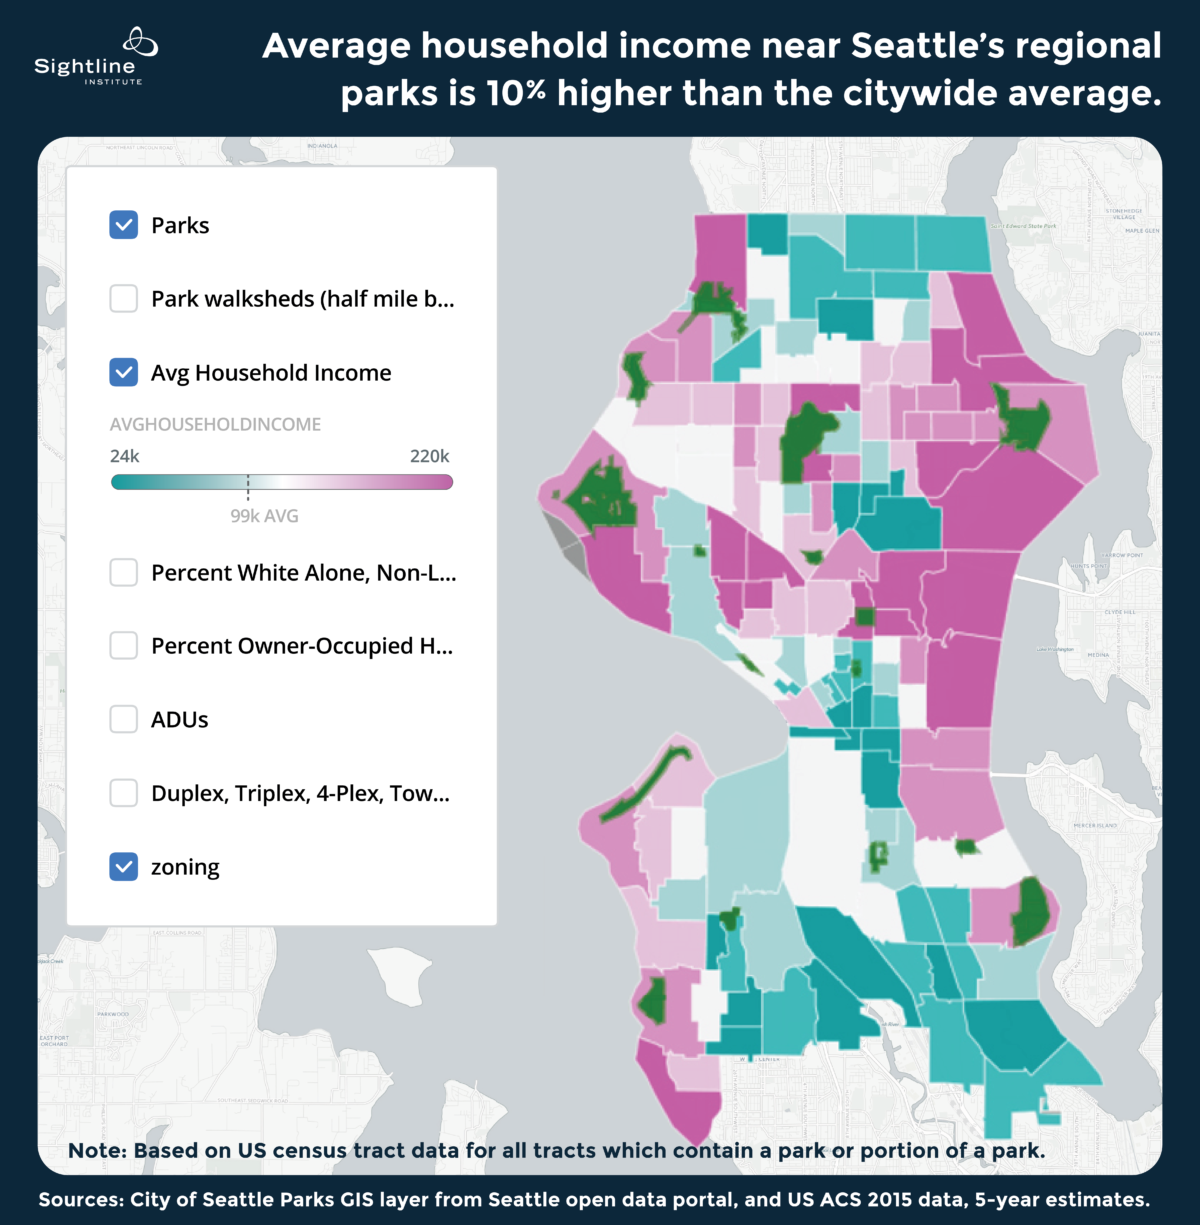 Seattle’s regional parks, shown in green, sit in high-income census tracts. Census tracts are color-coded according to average household income, with households in the darkest pink tracts averaging over $200,000 annual income and households in the turquoise tracts averaging less than $50,000 per year. Original Sightline Institute graphic, available under our free use policy.